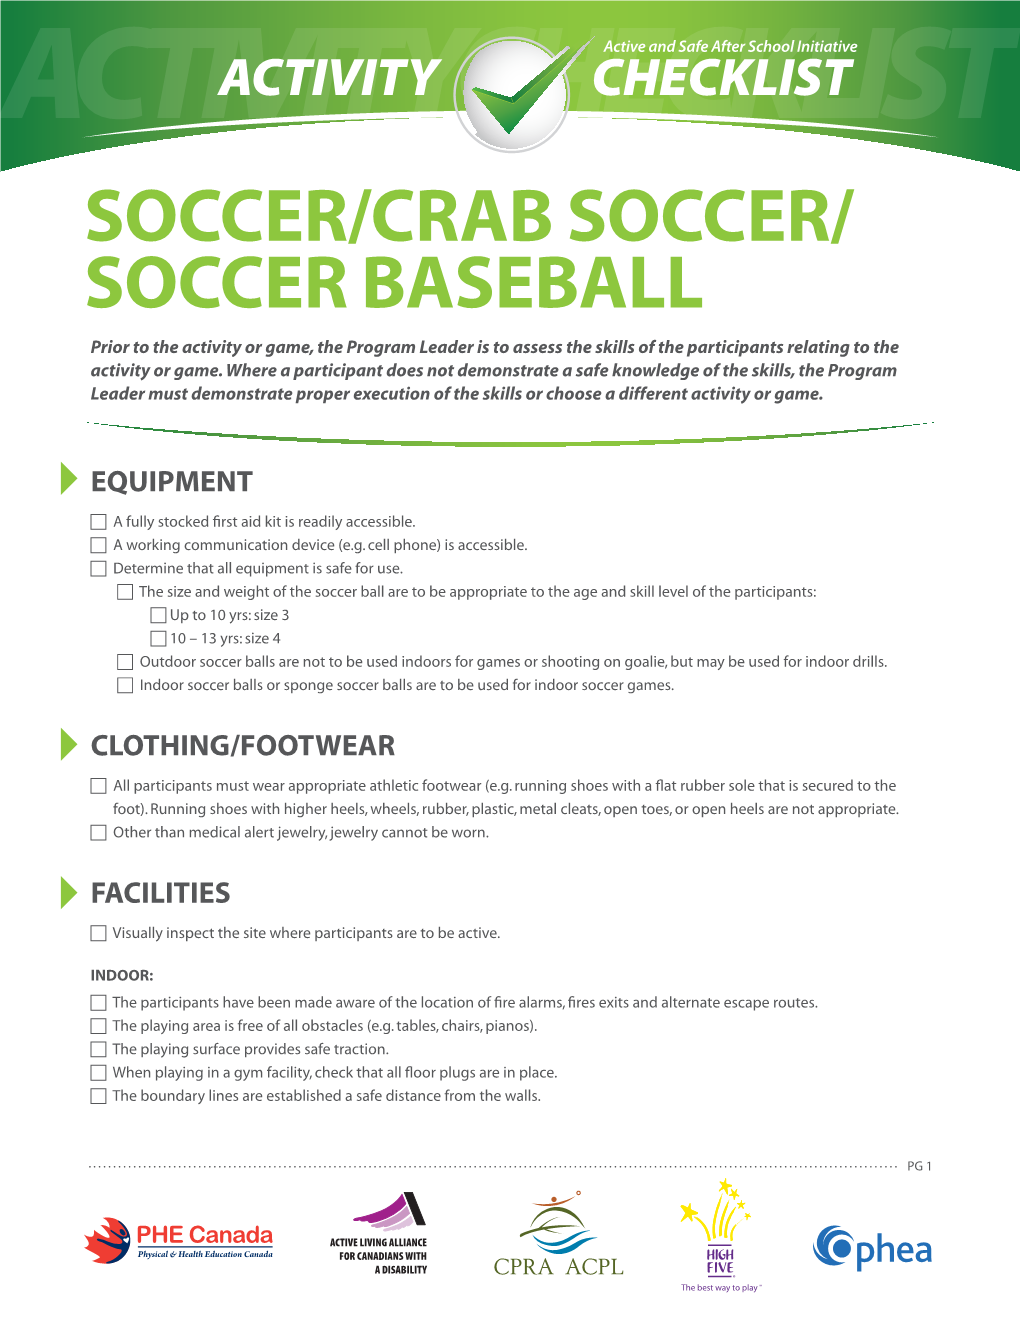 Soccer/Crab Soccer/ Soccer Baseball Prior to the Activity Or Game, the Program Leader Is to Assess the Skills of the Participants Relating to the Activity Or Game